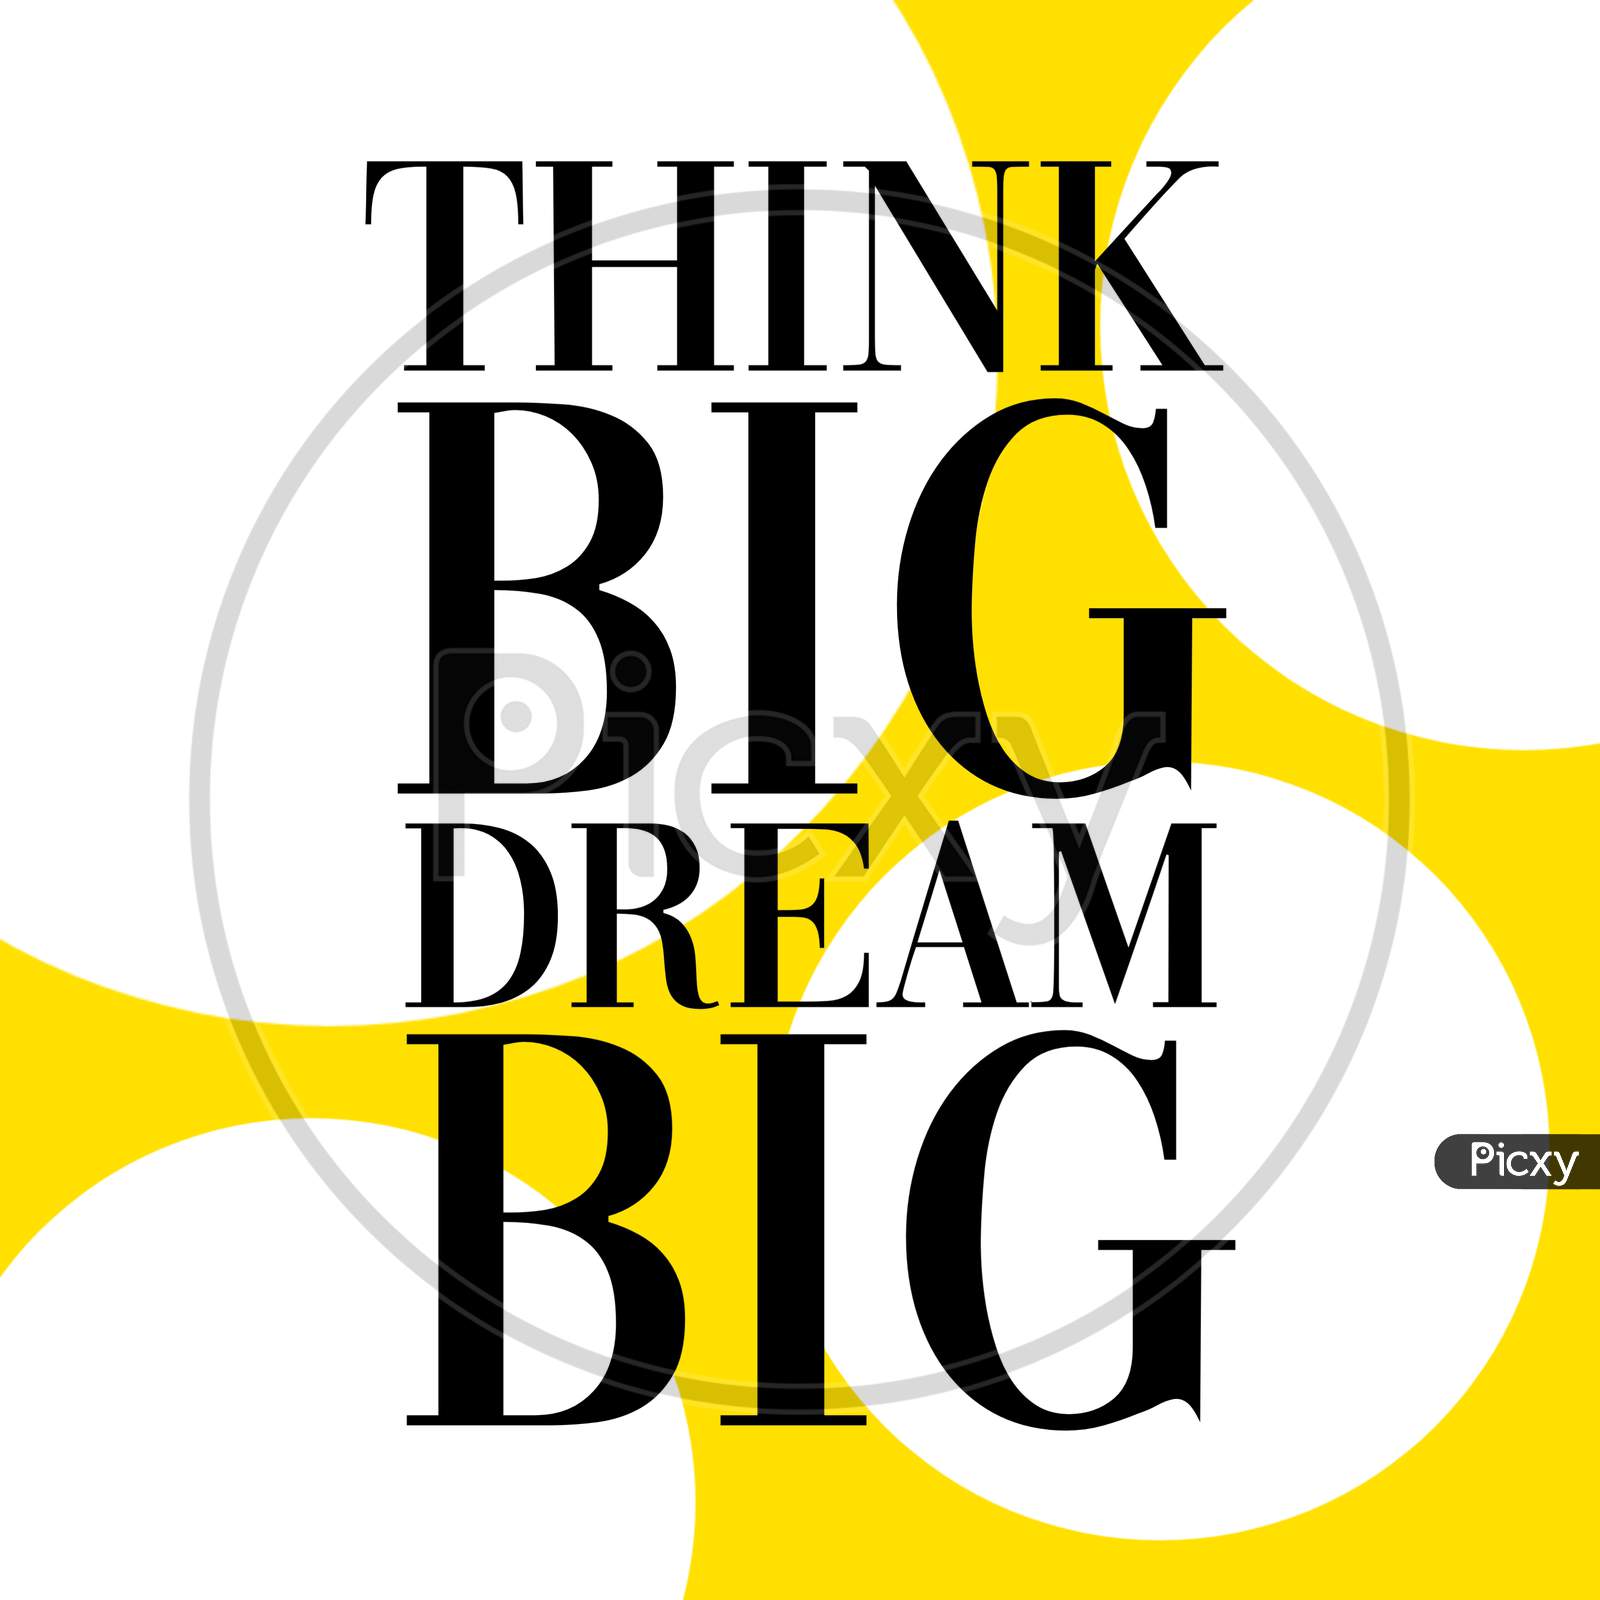 Think Big Dream Big (yellow and white background with black color fonts)